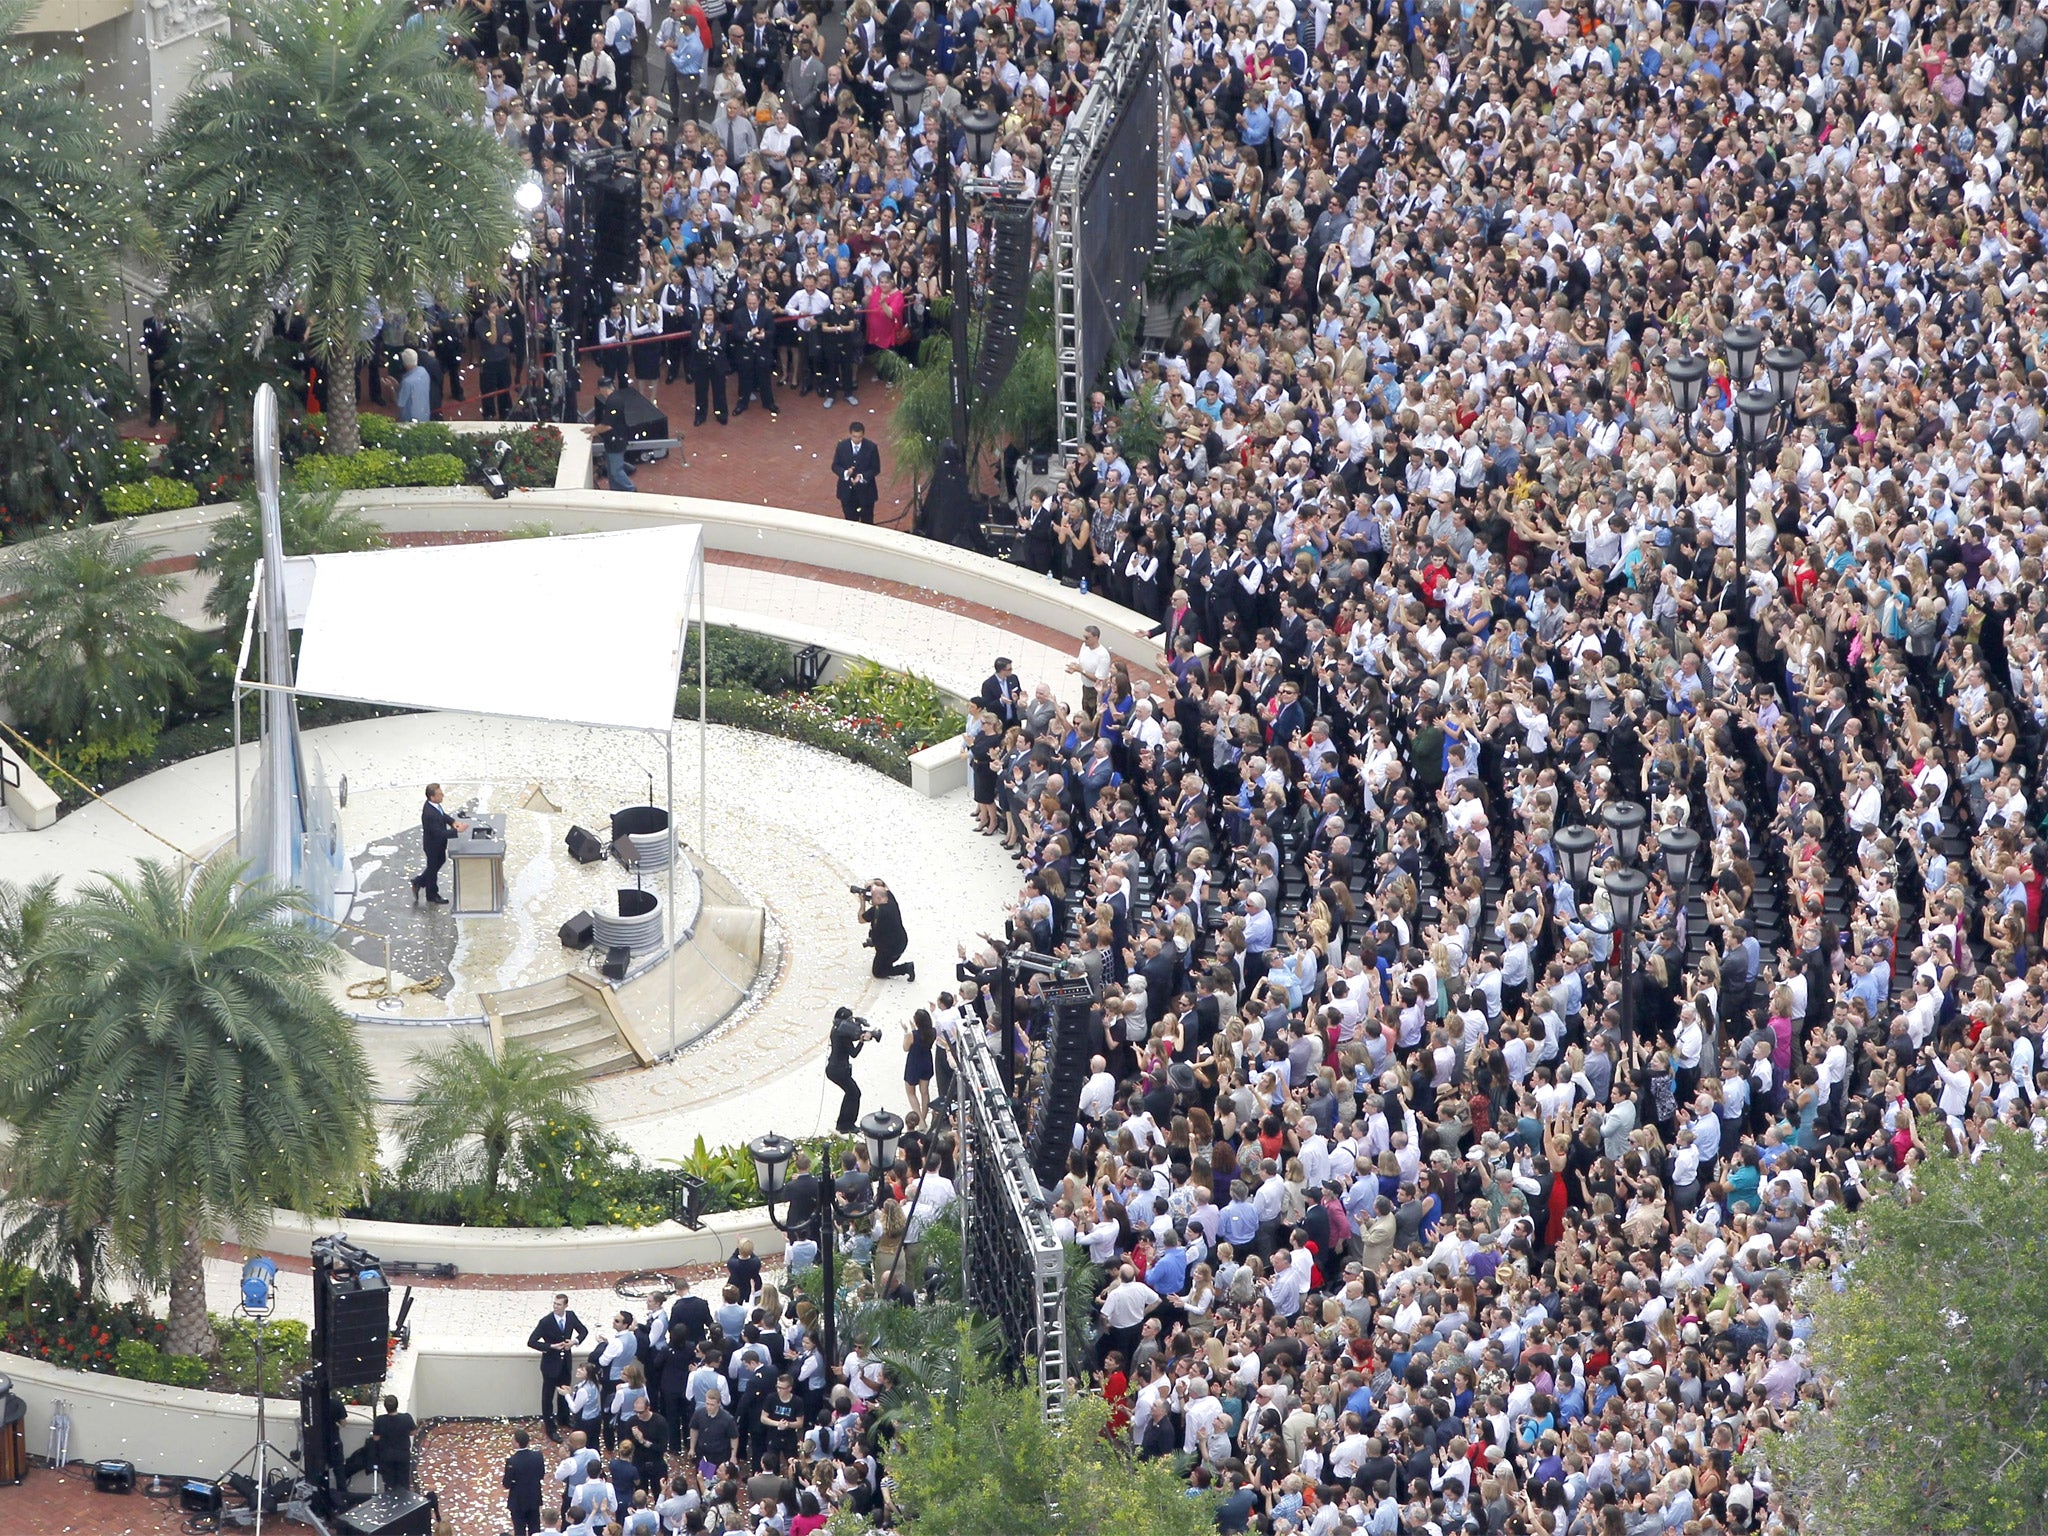 Confetti falls as the Church of Scientology leader David Miscavige dedicates the Flag Building in Clearwater, Florida